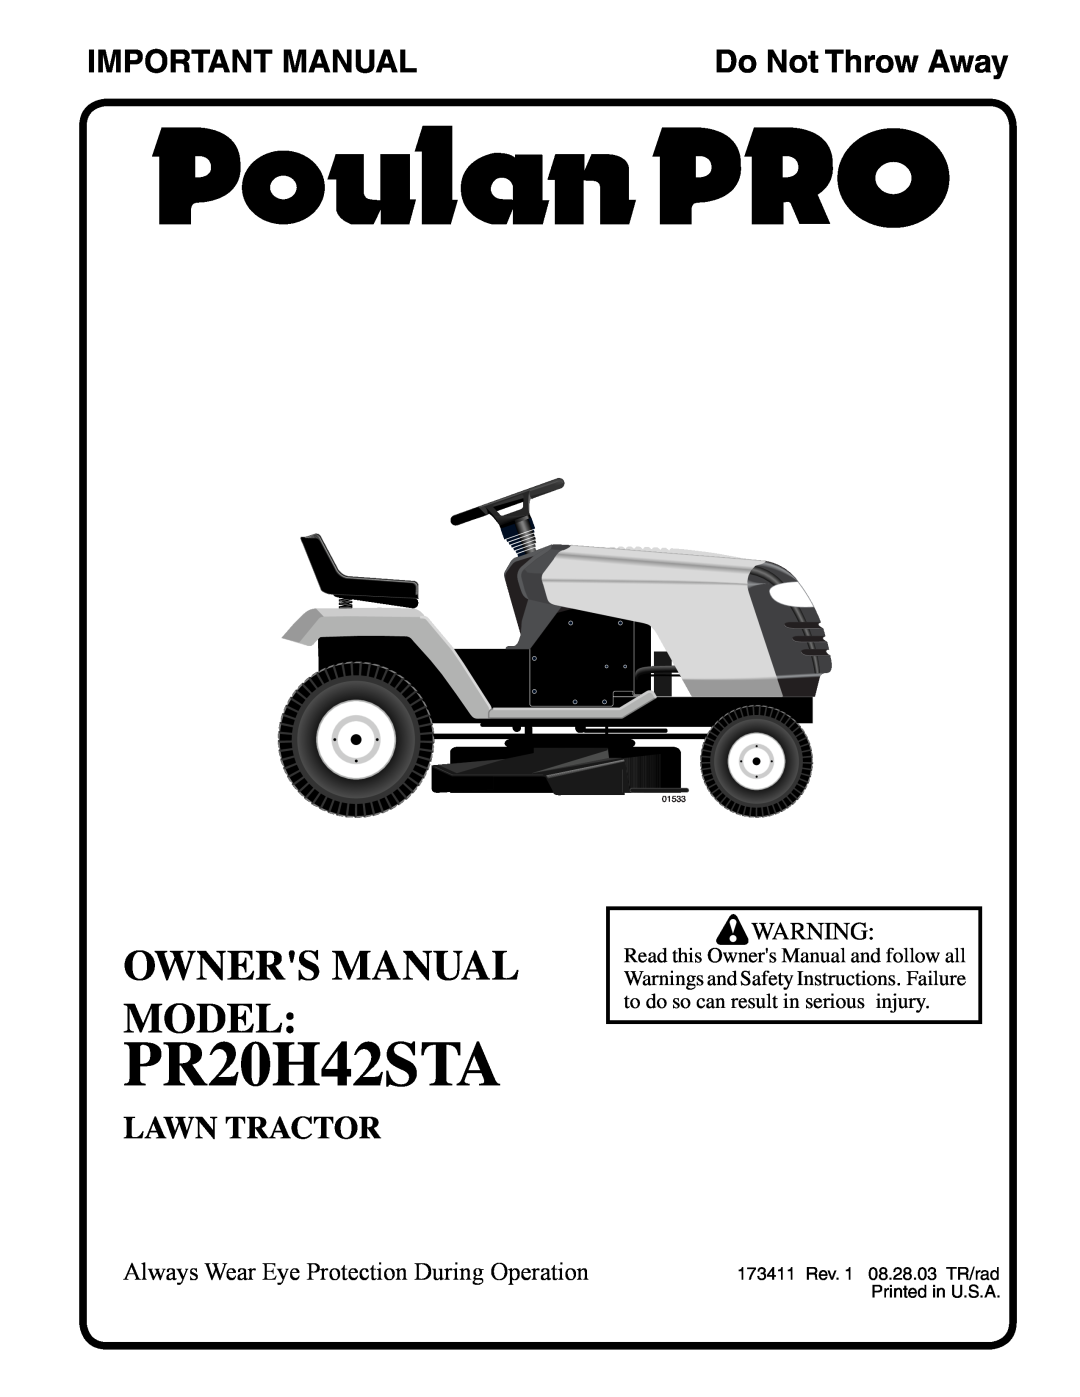 Poulan PR20H42STA owner manual Important Manual, Do Not Throw Away, Lawn Tractor, 01533 